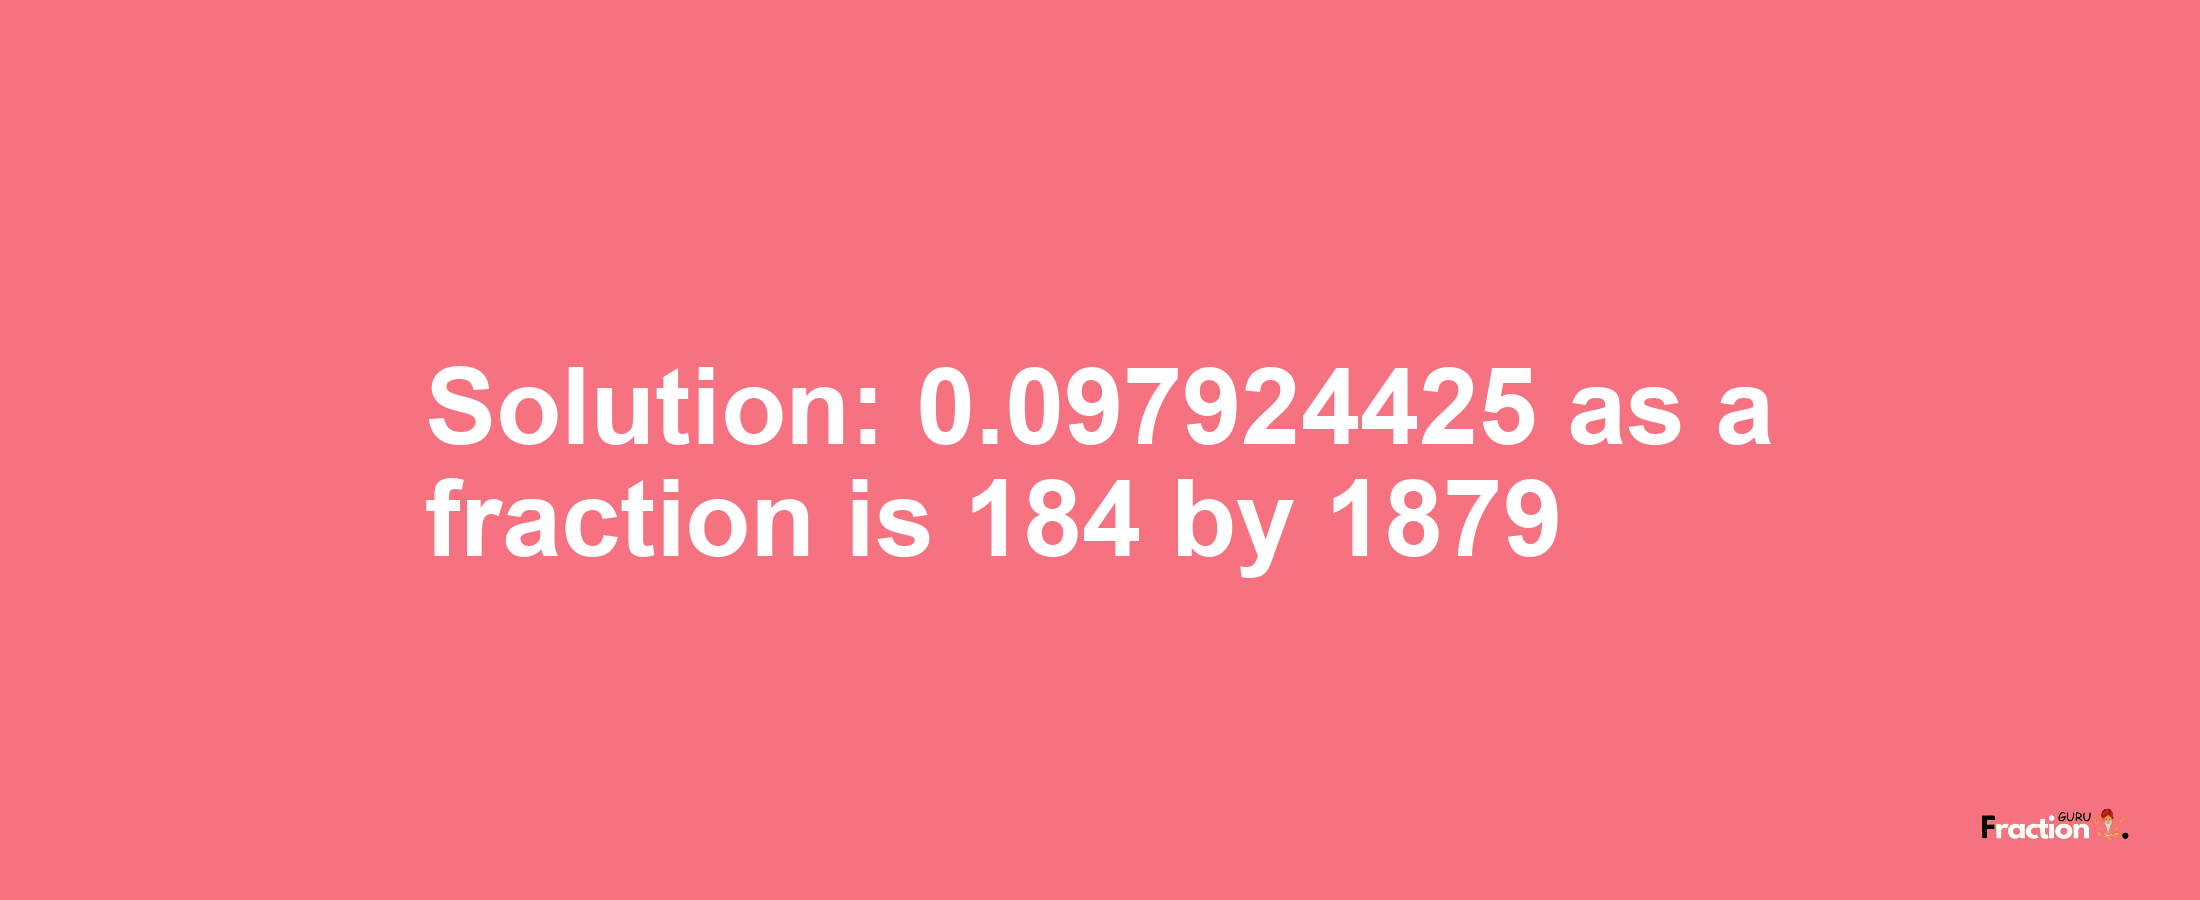 Solution:0.097924425 as a fraction is 184/1879